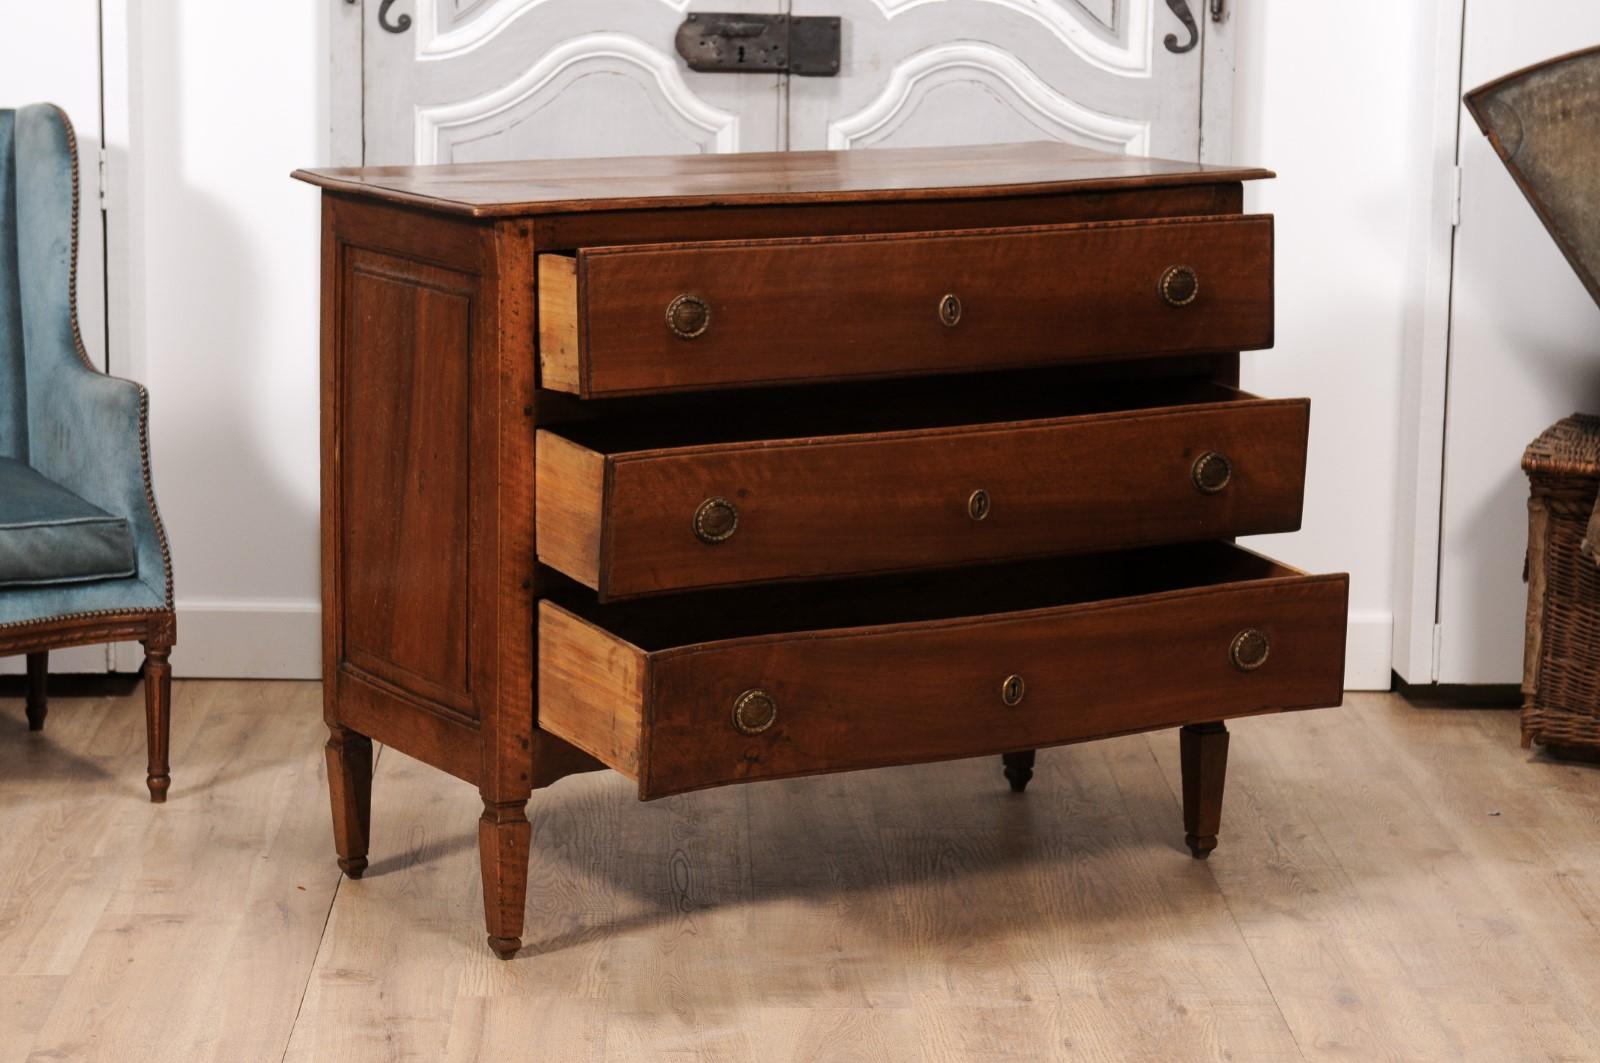 Carved Italian 1820s Serpentine Front Walnut Commode with Three Drawers For Sale